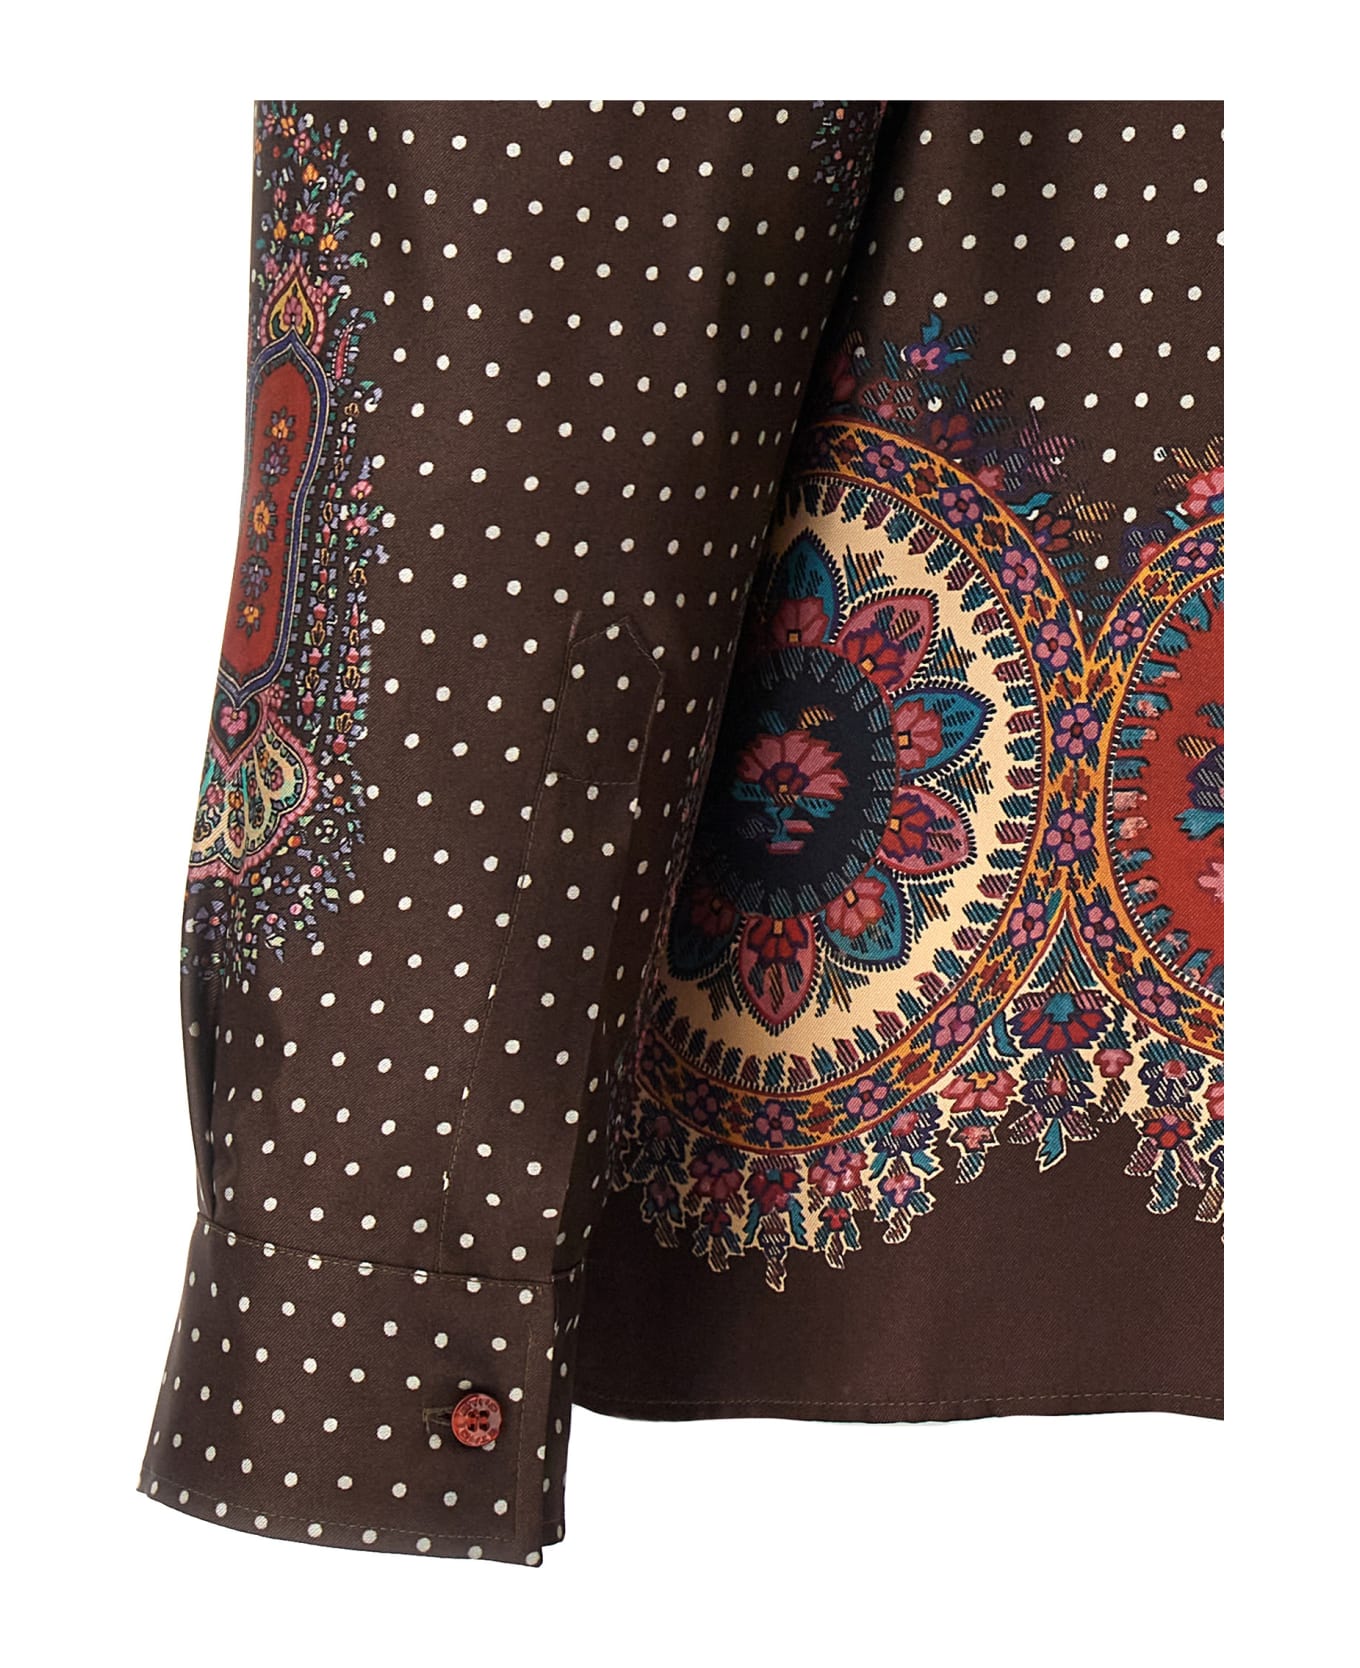 Etro All Over Print Shirt - Brown シャツ